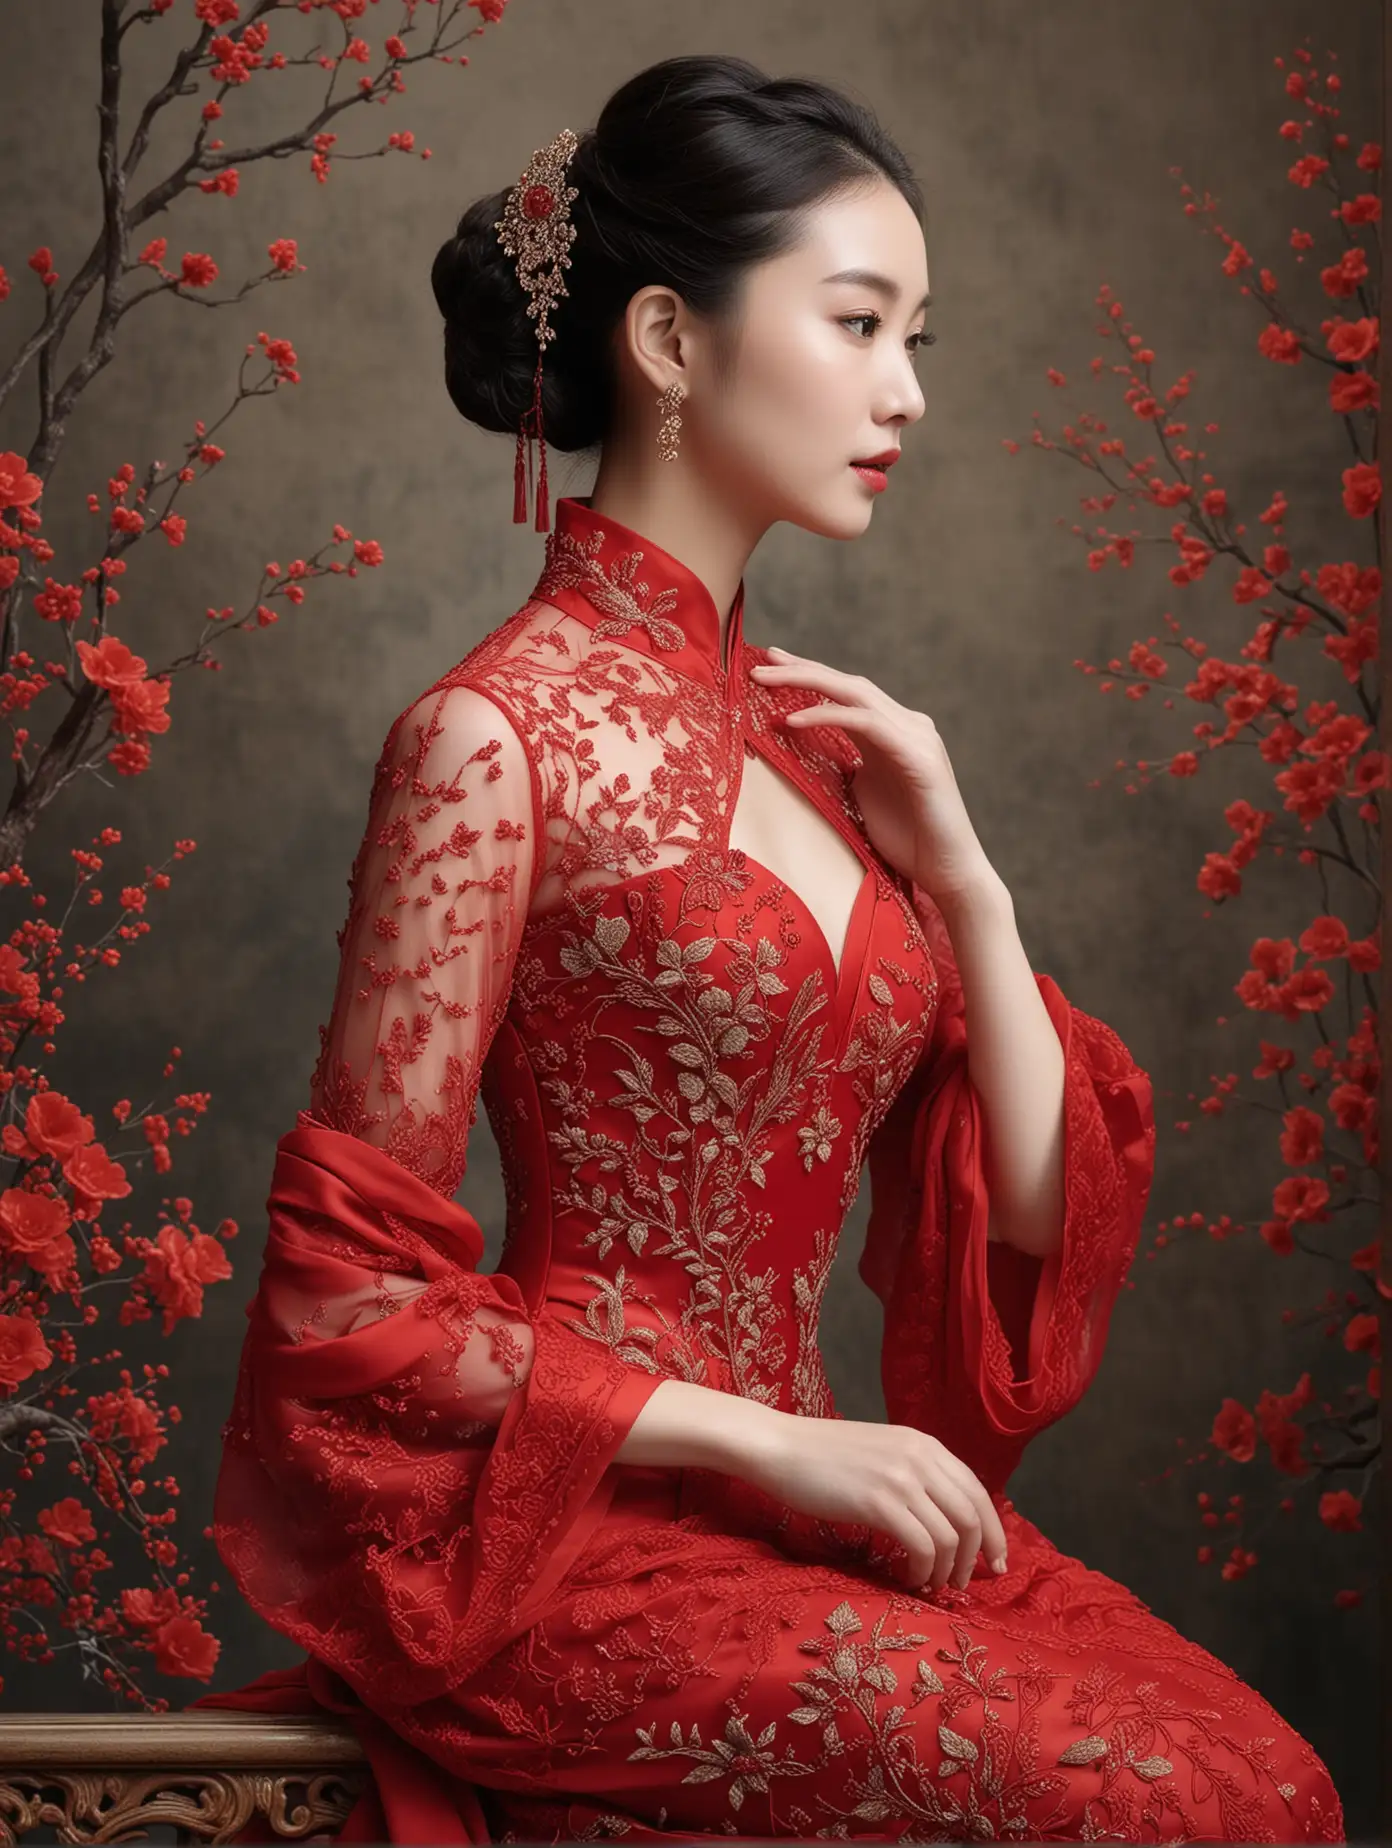 Gan Yuanyuan ,The red dress is a true masterpiece, and every detail has been carefully considered. From the intricate lacework to the carefully placed beading, every element has been expertly crafted to create a sense of awe and wonder. It is a unique and original creation that is truly one of a kind. 